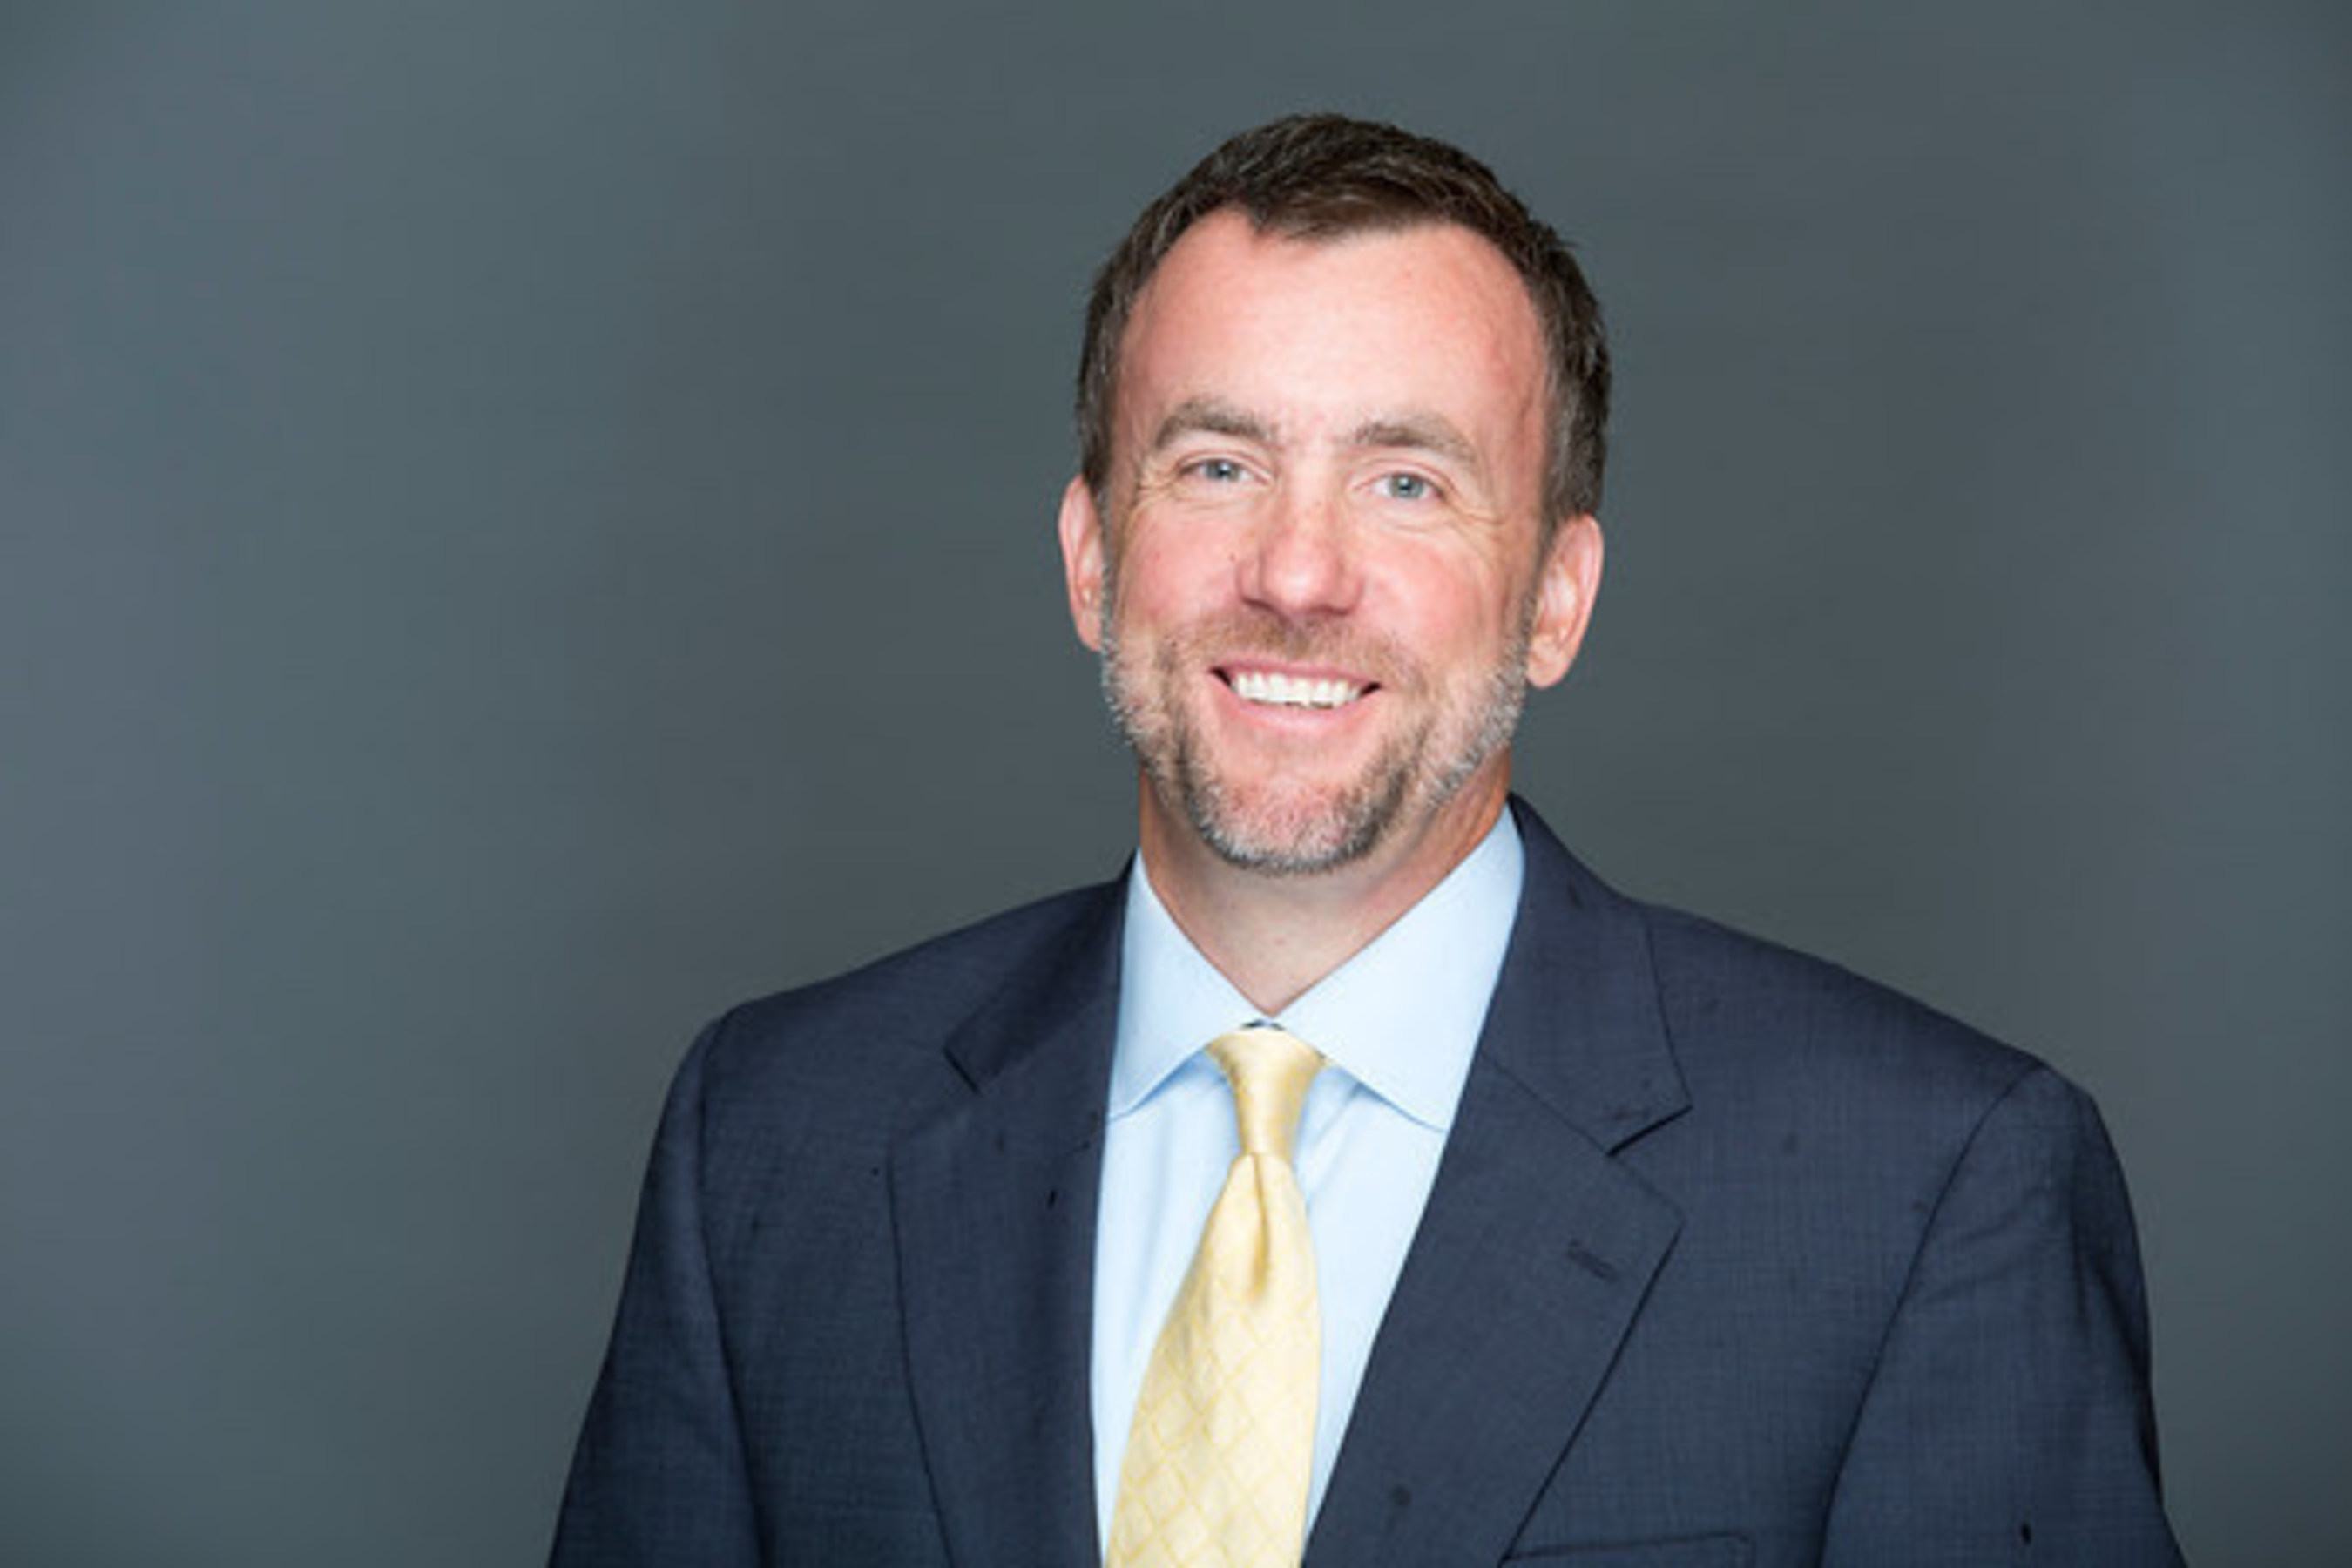 PruittHealth announces that Mr. Kevin Brenan has joined the organization as Senior Vice President of Finance.